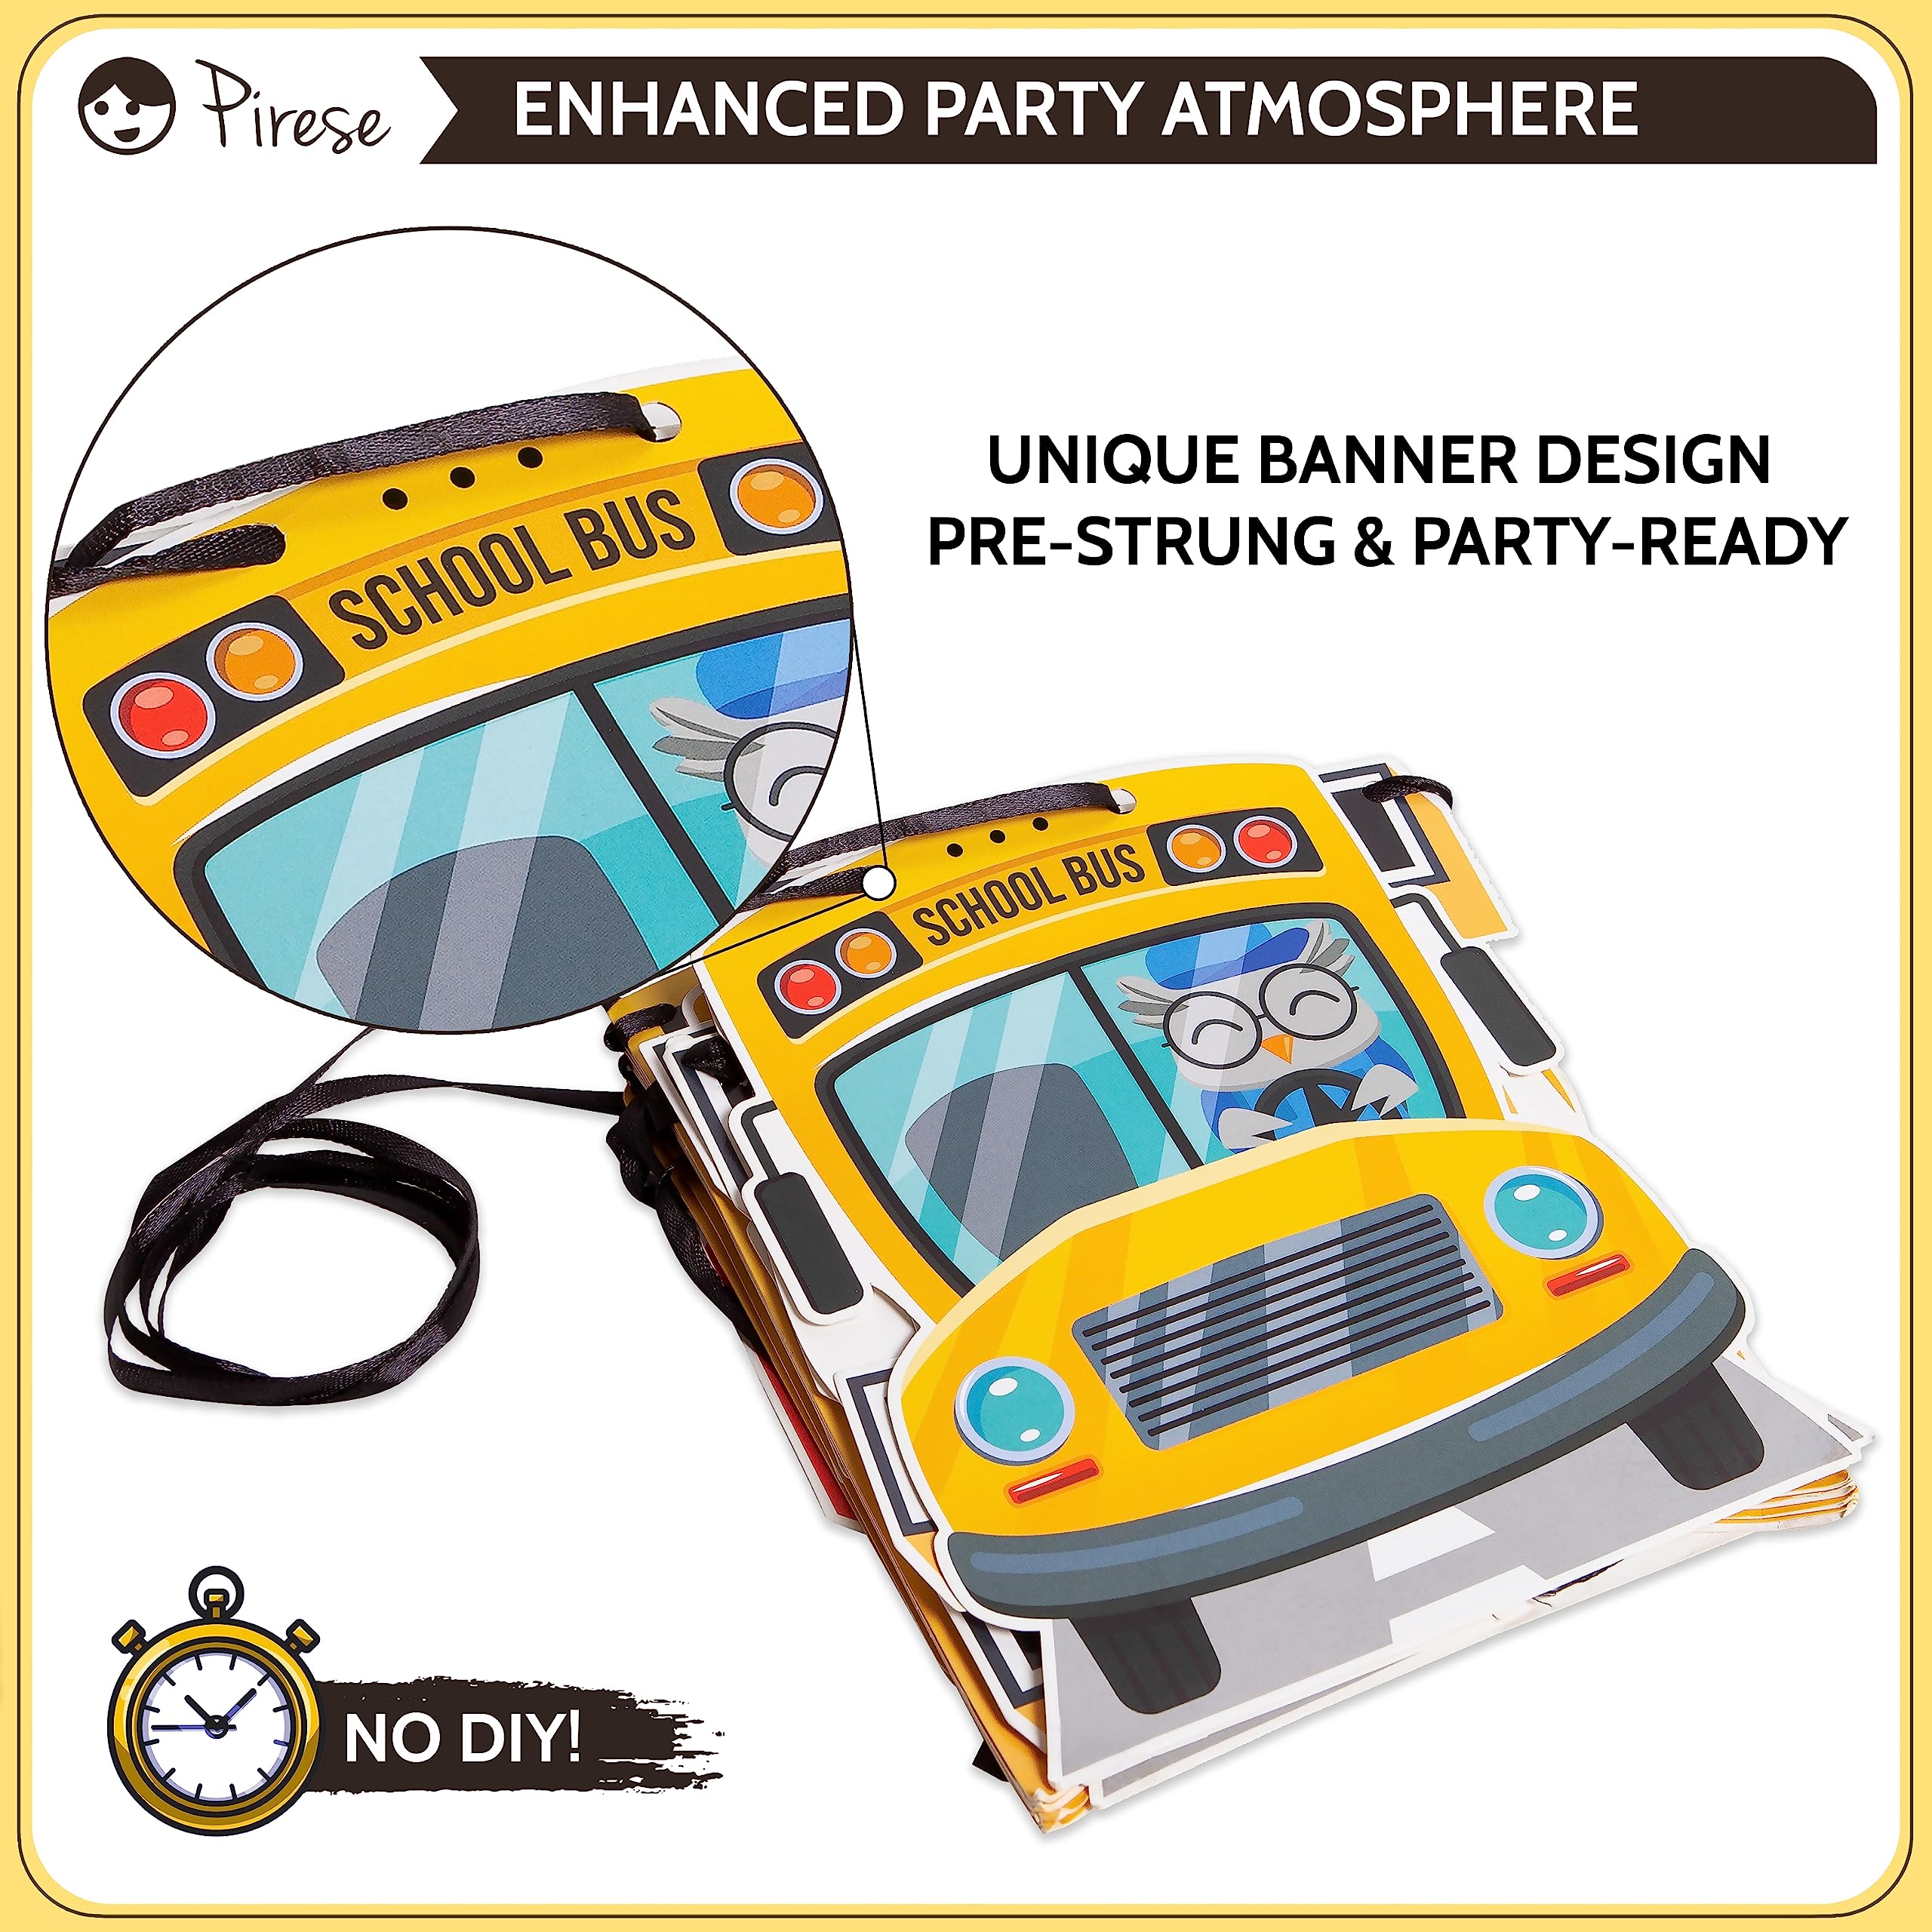 Pirese Wheels On The Bus Birthday Decorations, School Bus Decorations For Party, School Bus Birthday Party Decorations | School Bus Birthday Banner | School Bus Party Decorations | Bus Theme Party